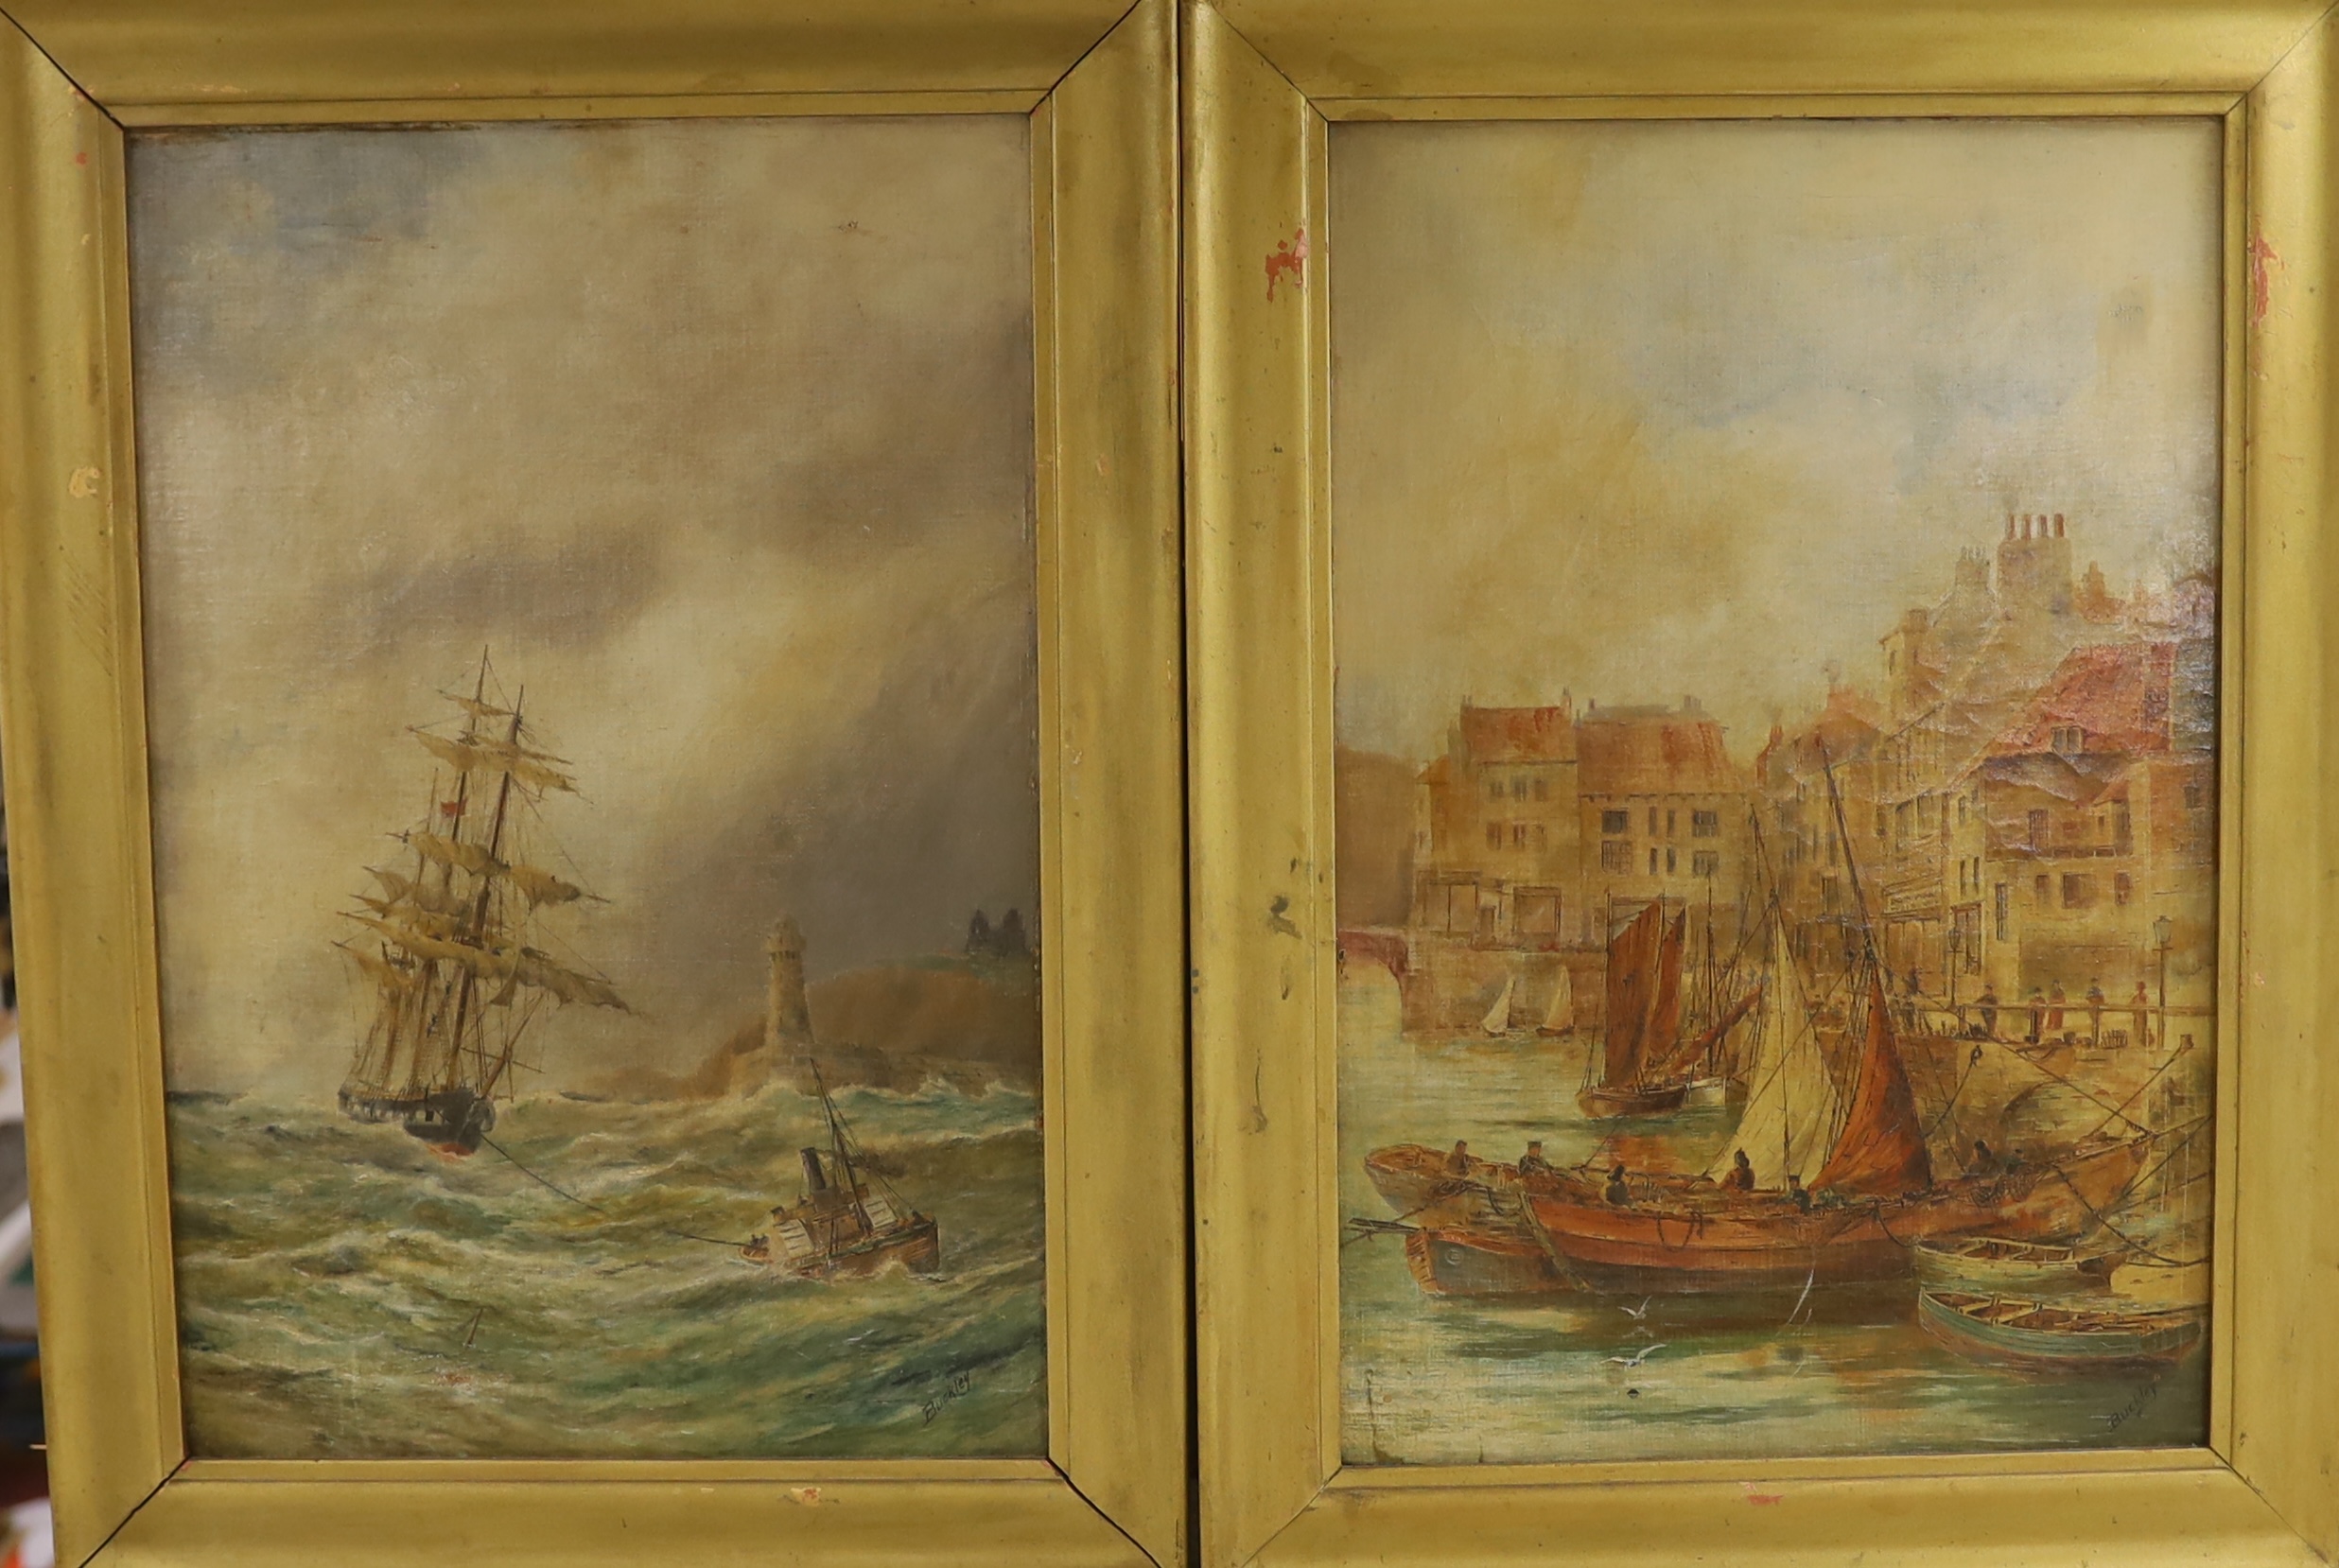 Buckley (c.1900), a pair of oils on canvas, Views of Whitby, signed, 45 x 30cm